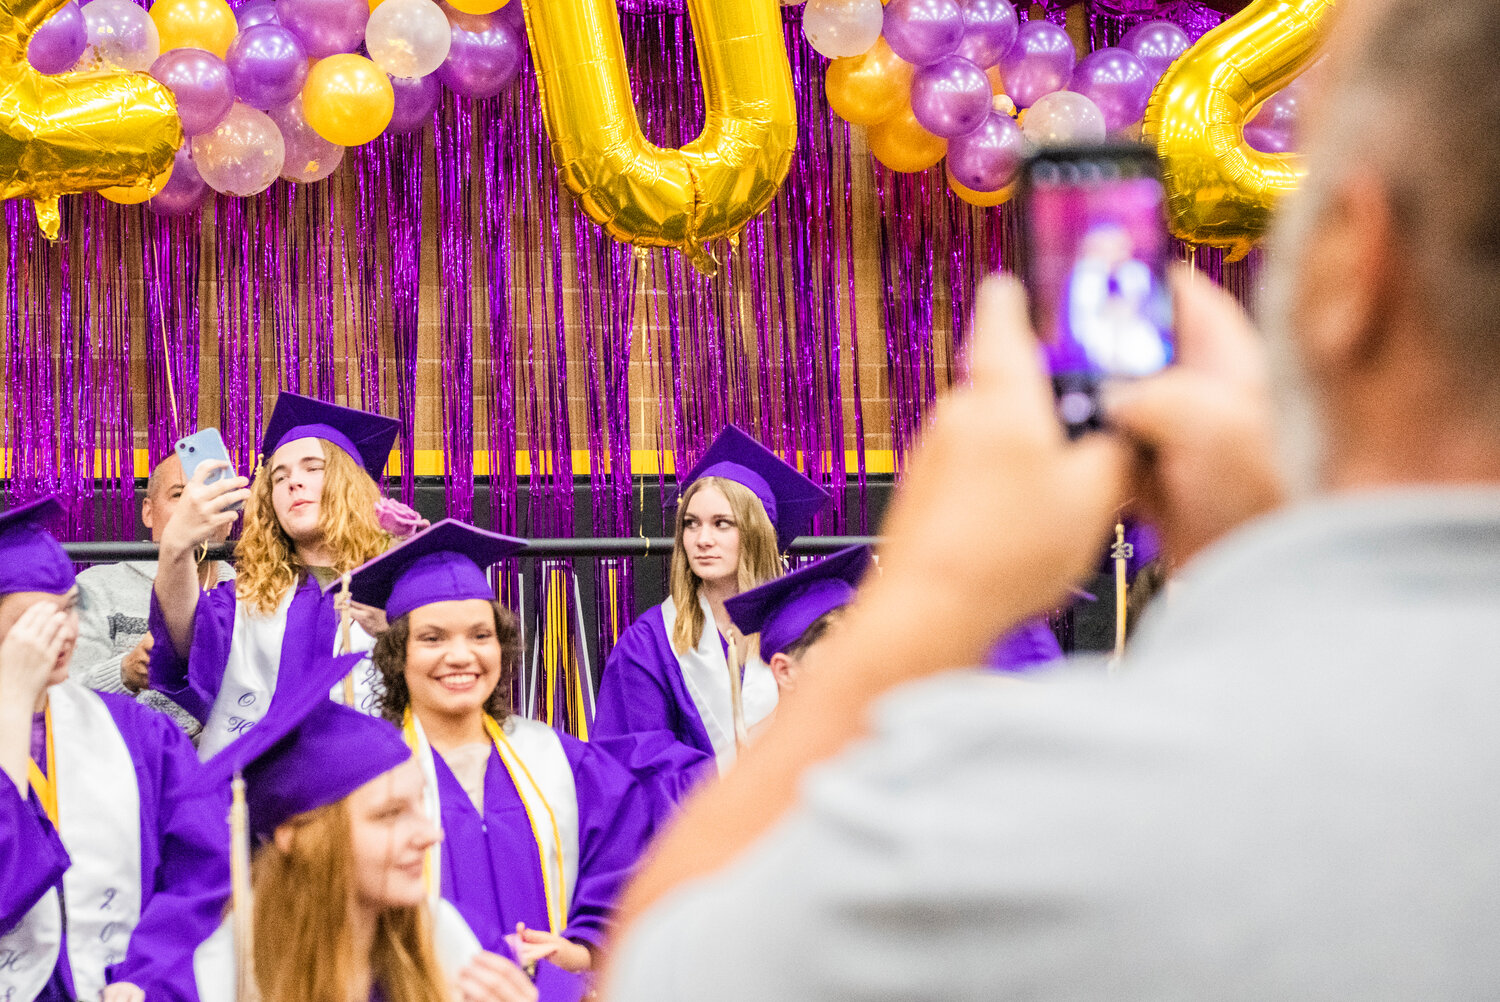 Onalaska High School students take selfies and pose for photos with family and friends at the start of their graduation ceremony on Friday night.